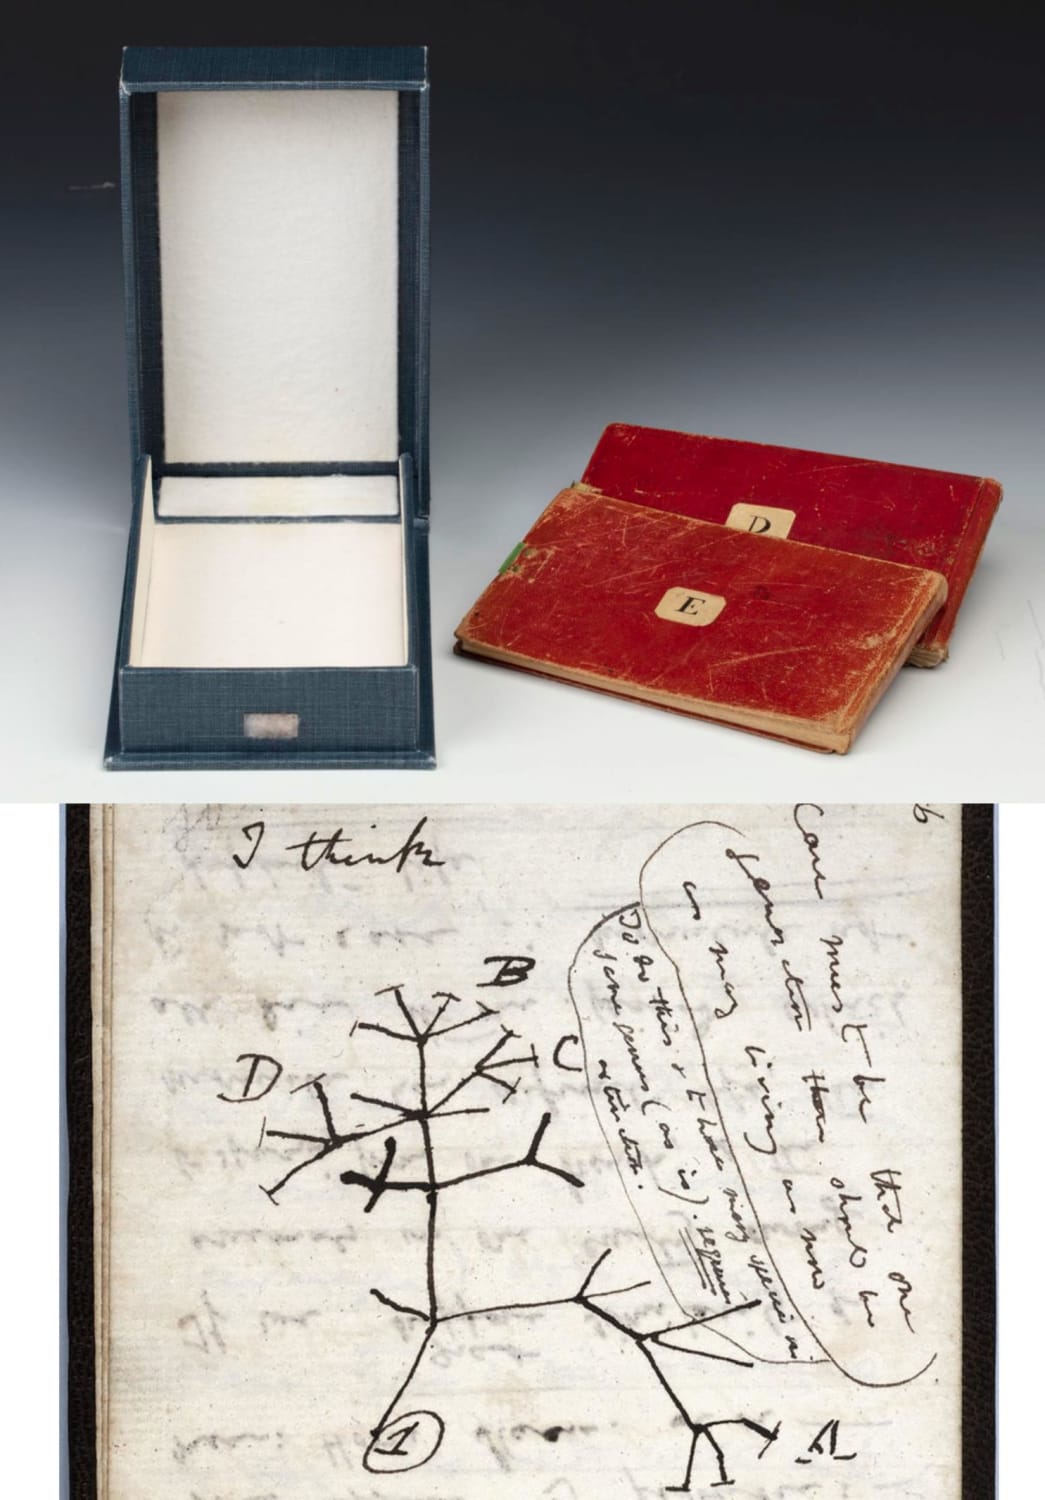 After mysteriously vanishing from Cambridge University 22 years ago, 2 notebooks belonging to Charles Darwin, one of which contains his iconic 1837 Tree of Life sketch, have been safely returned to the University in a pink gift bag, along with an envelope signed: Librarian Happy Easter X